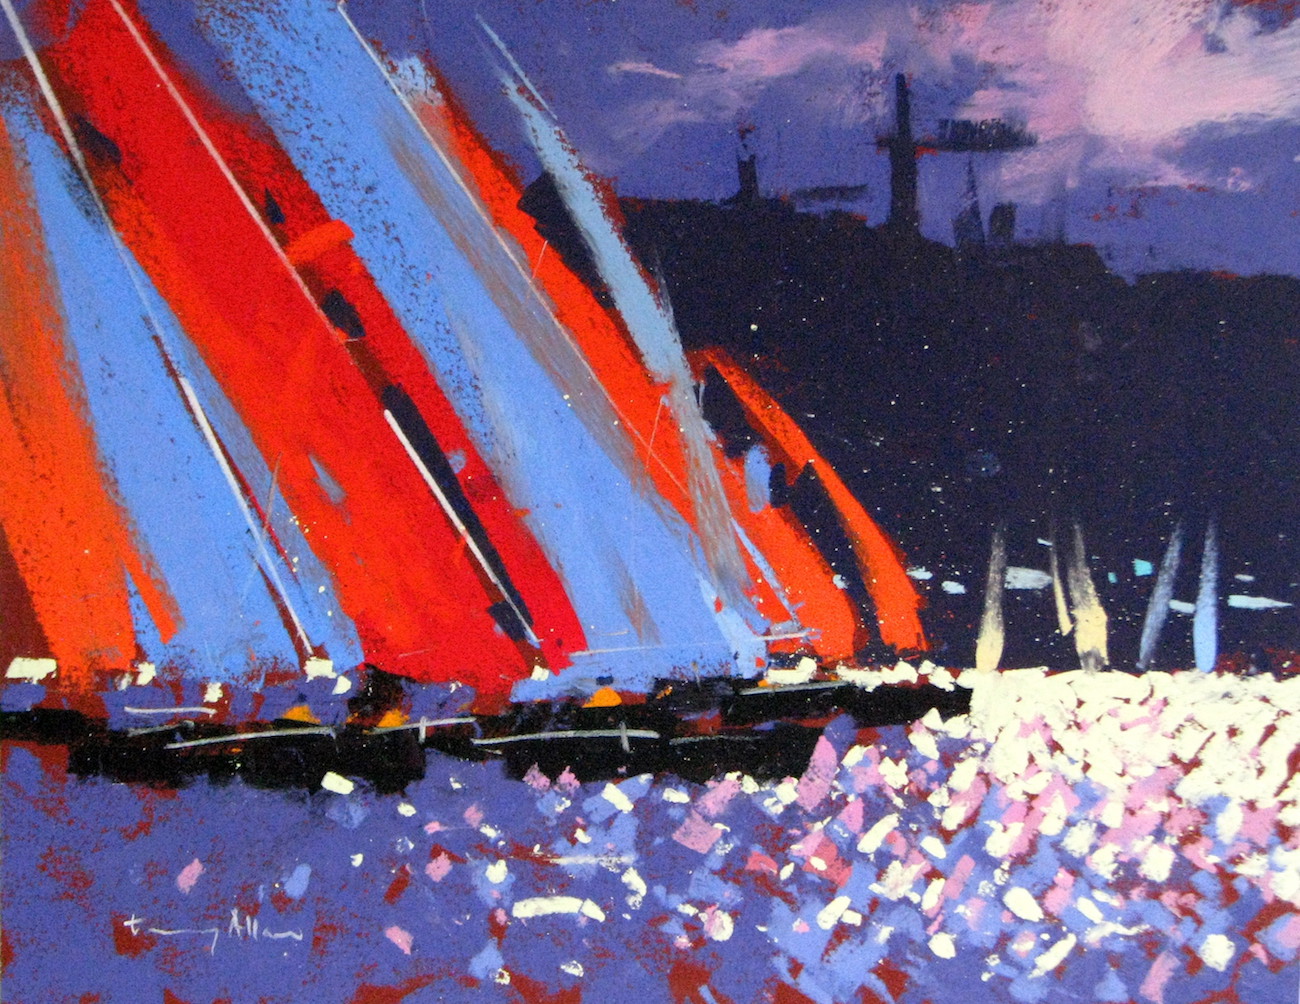 Tony Allain, "Racing," pastel on Colourfix paper, 14 x 10 in